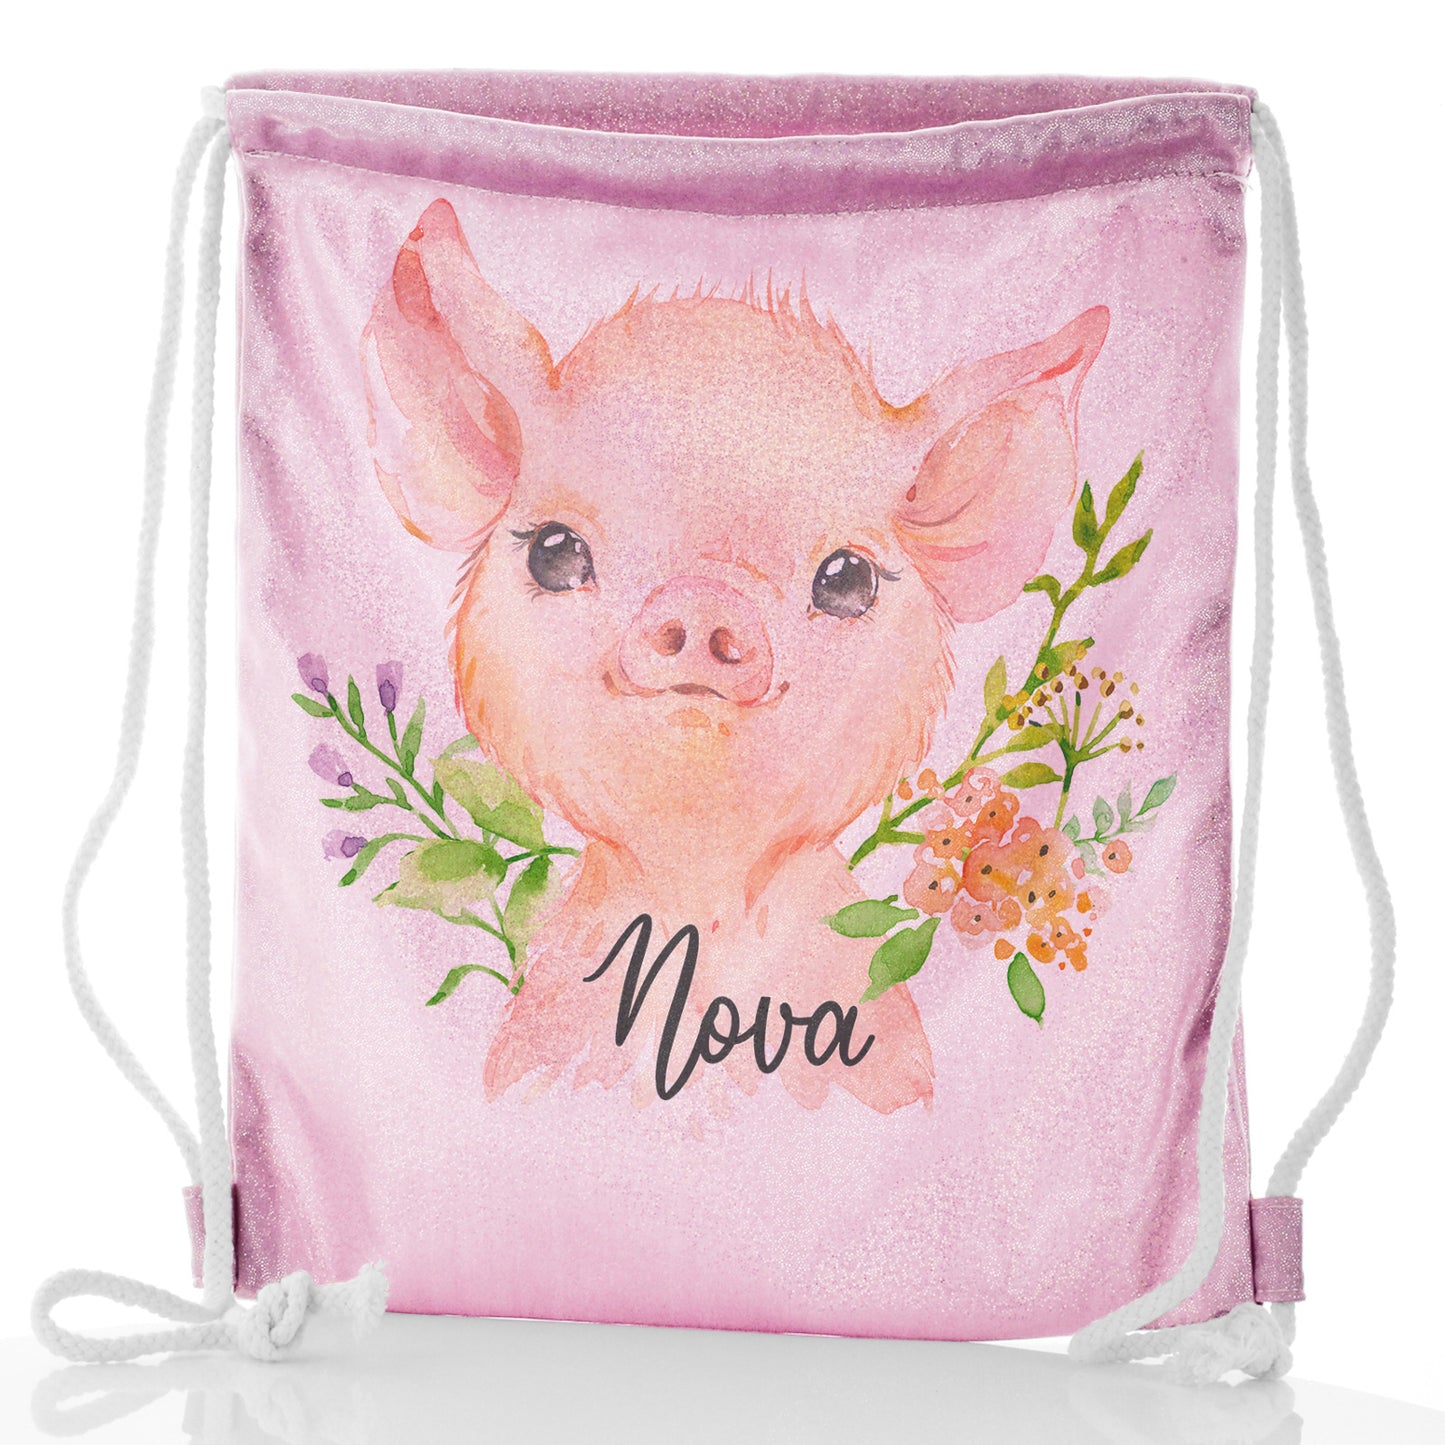 Personalised Glitter Drawstring Backpack with Pink Pig Flowers and Cute Text